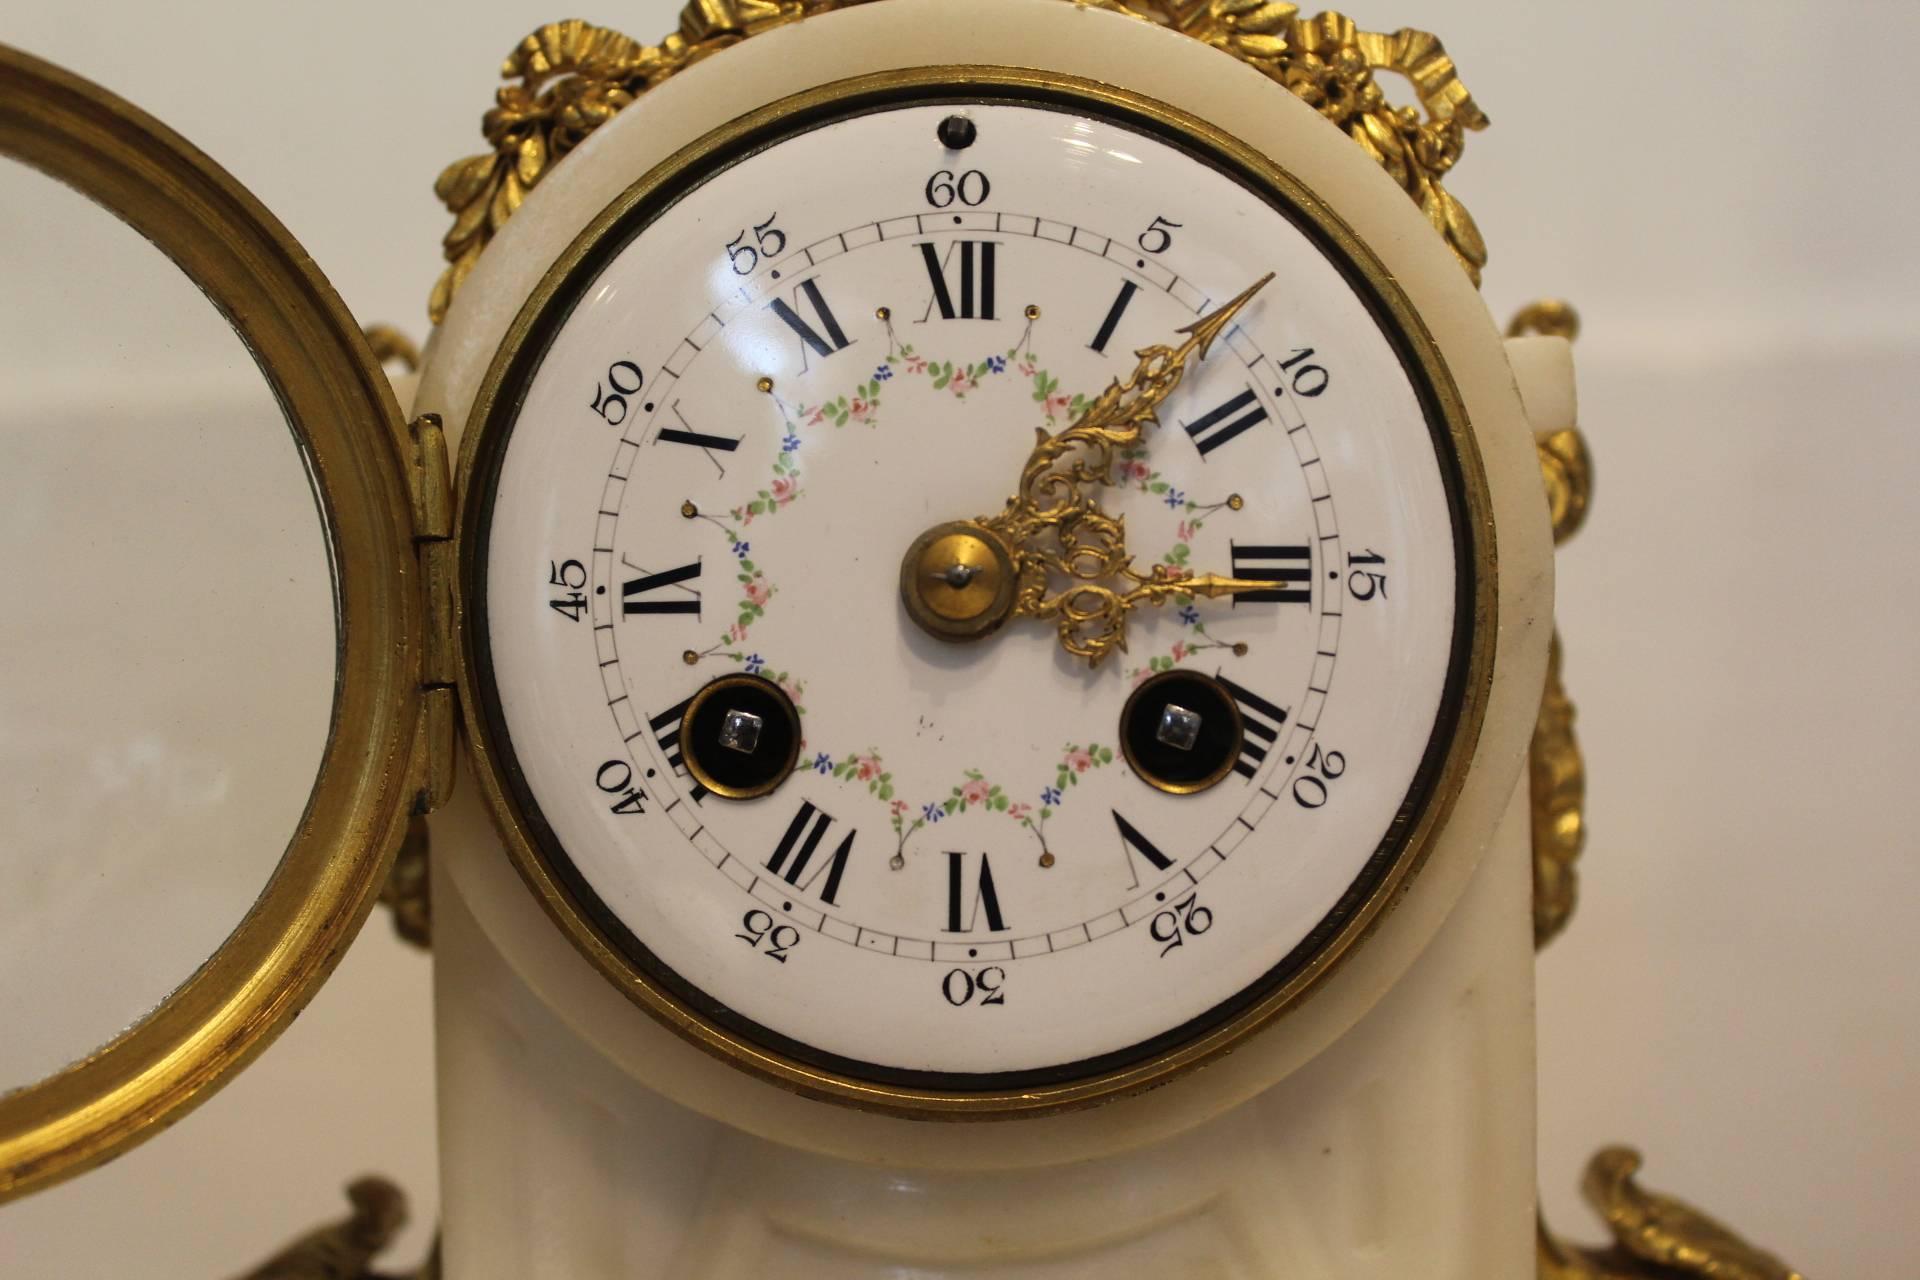 
French, white marble garniture with decorative ormolu mounts, circa 1890.

This elegant French garniture/clock set has an eight-day movement de Paris, which will strike both hours and half hours on a bell. The movement is stamped by the maker,